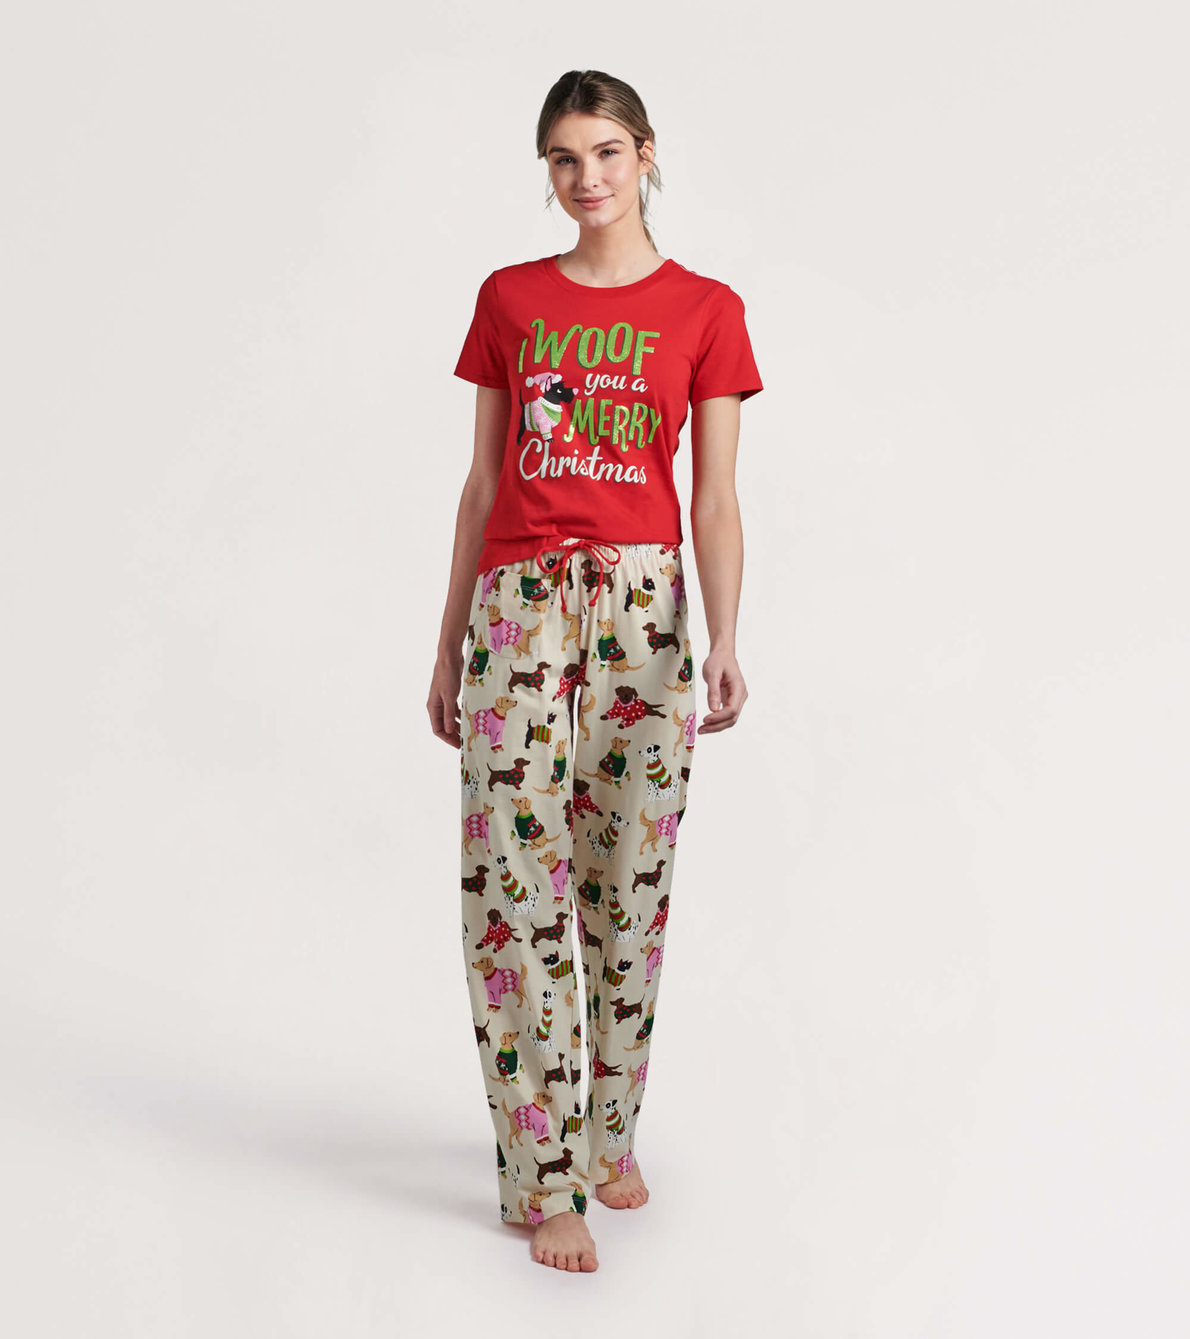 View larger image of Women's Woofing Christmas Jersey Pajama Pants